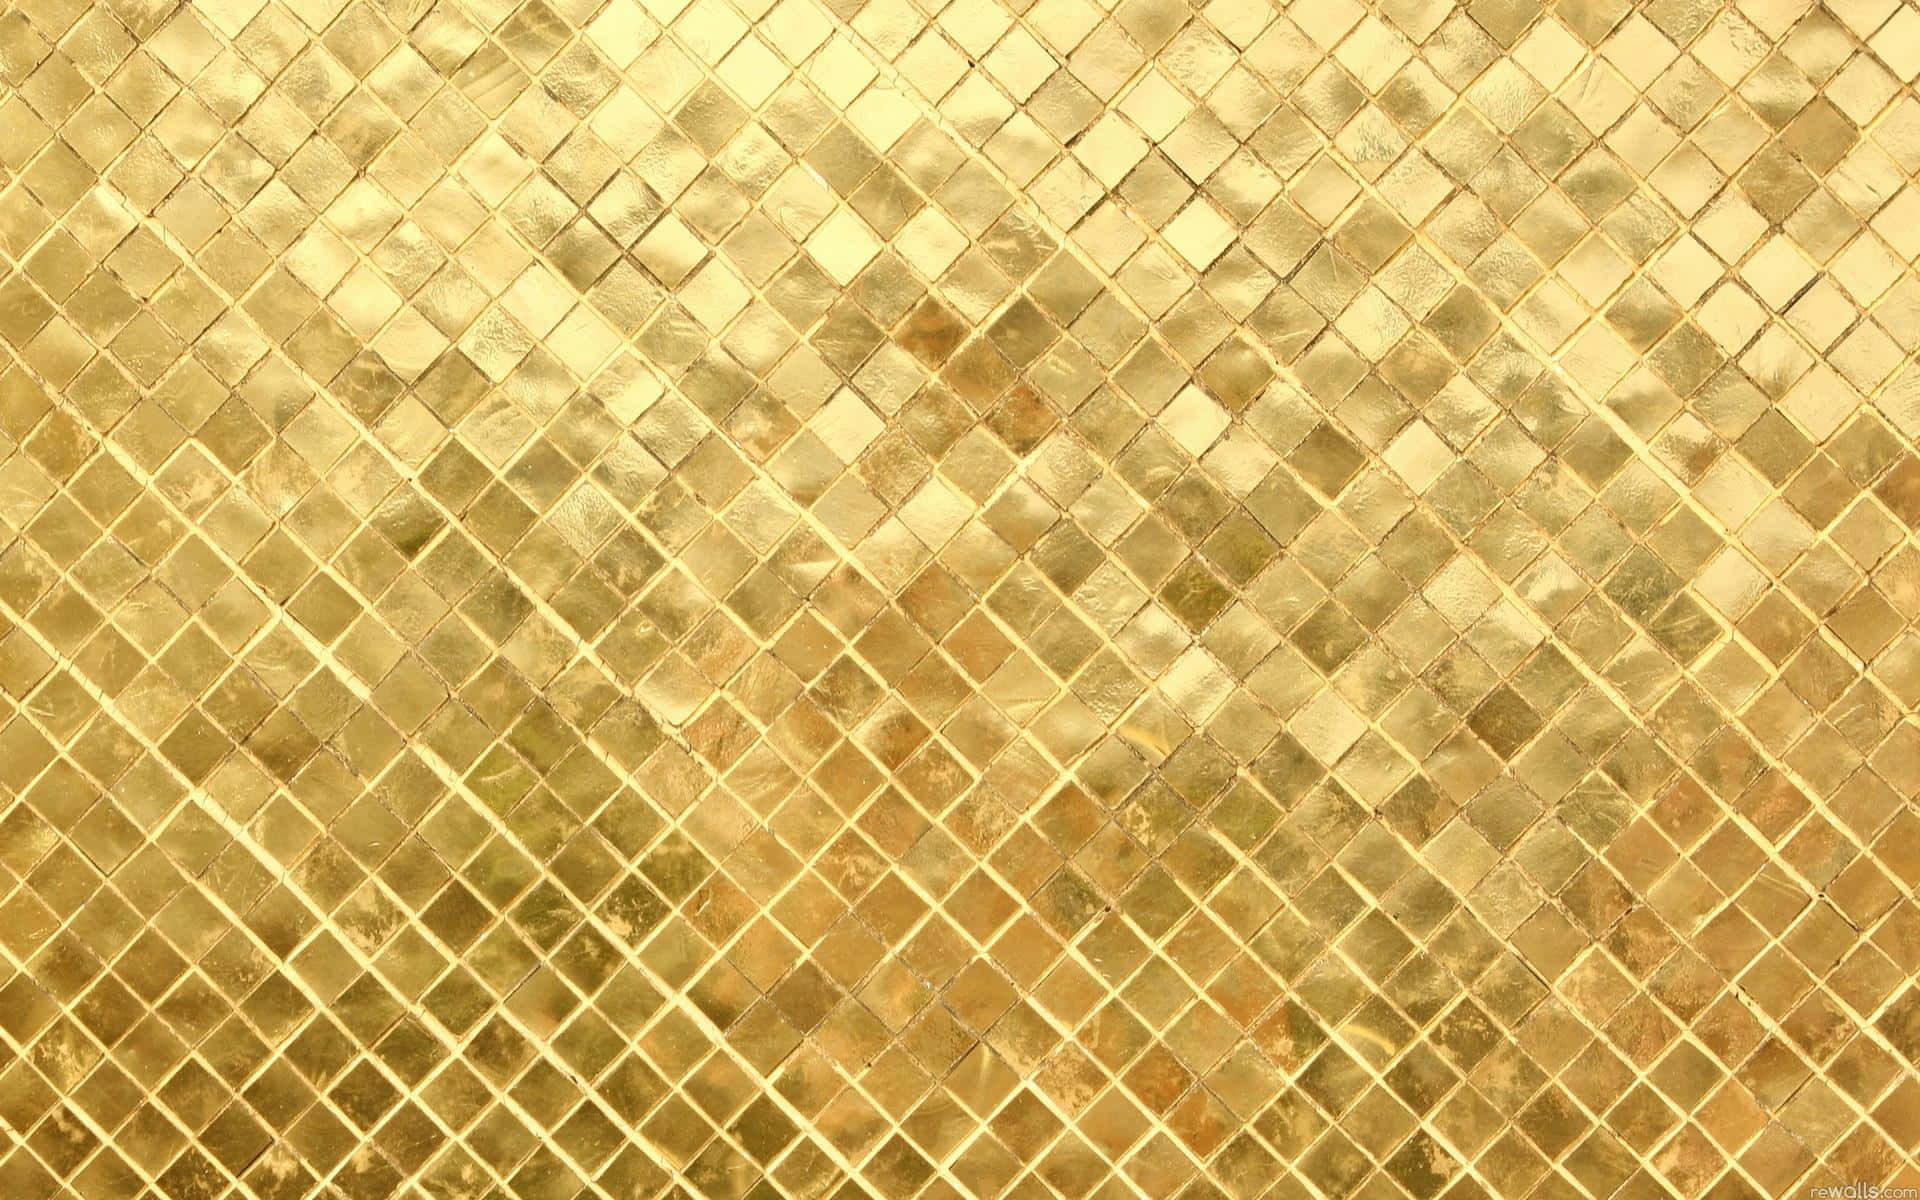 Glowing and Luxurious Metallic Gold Background